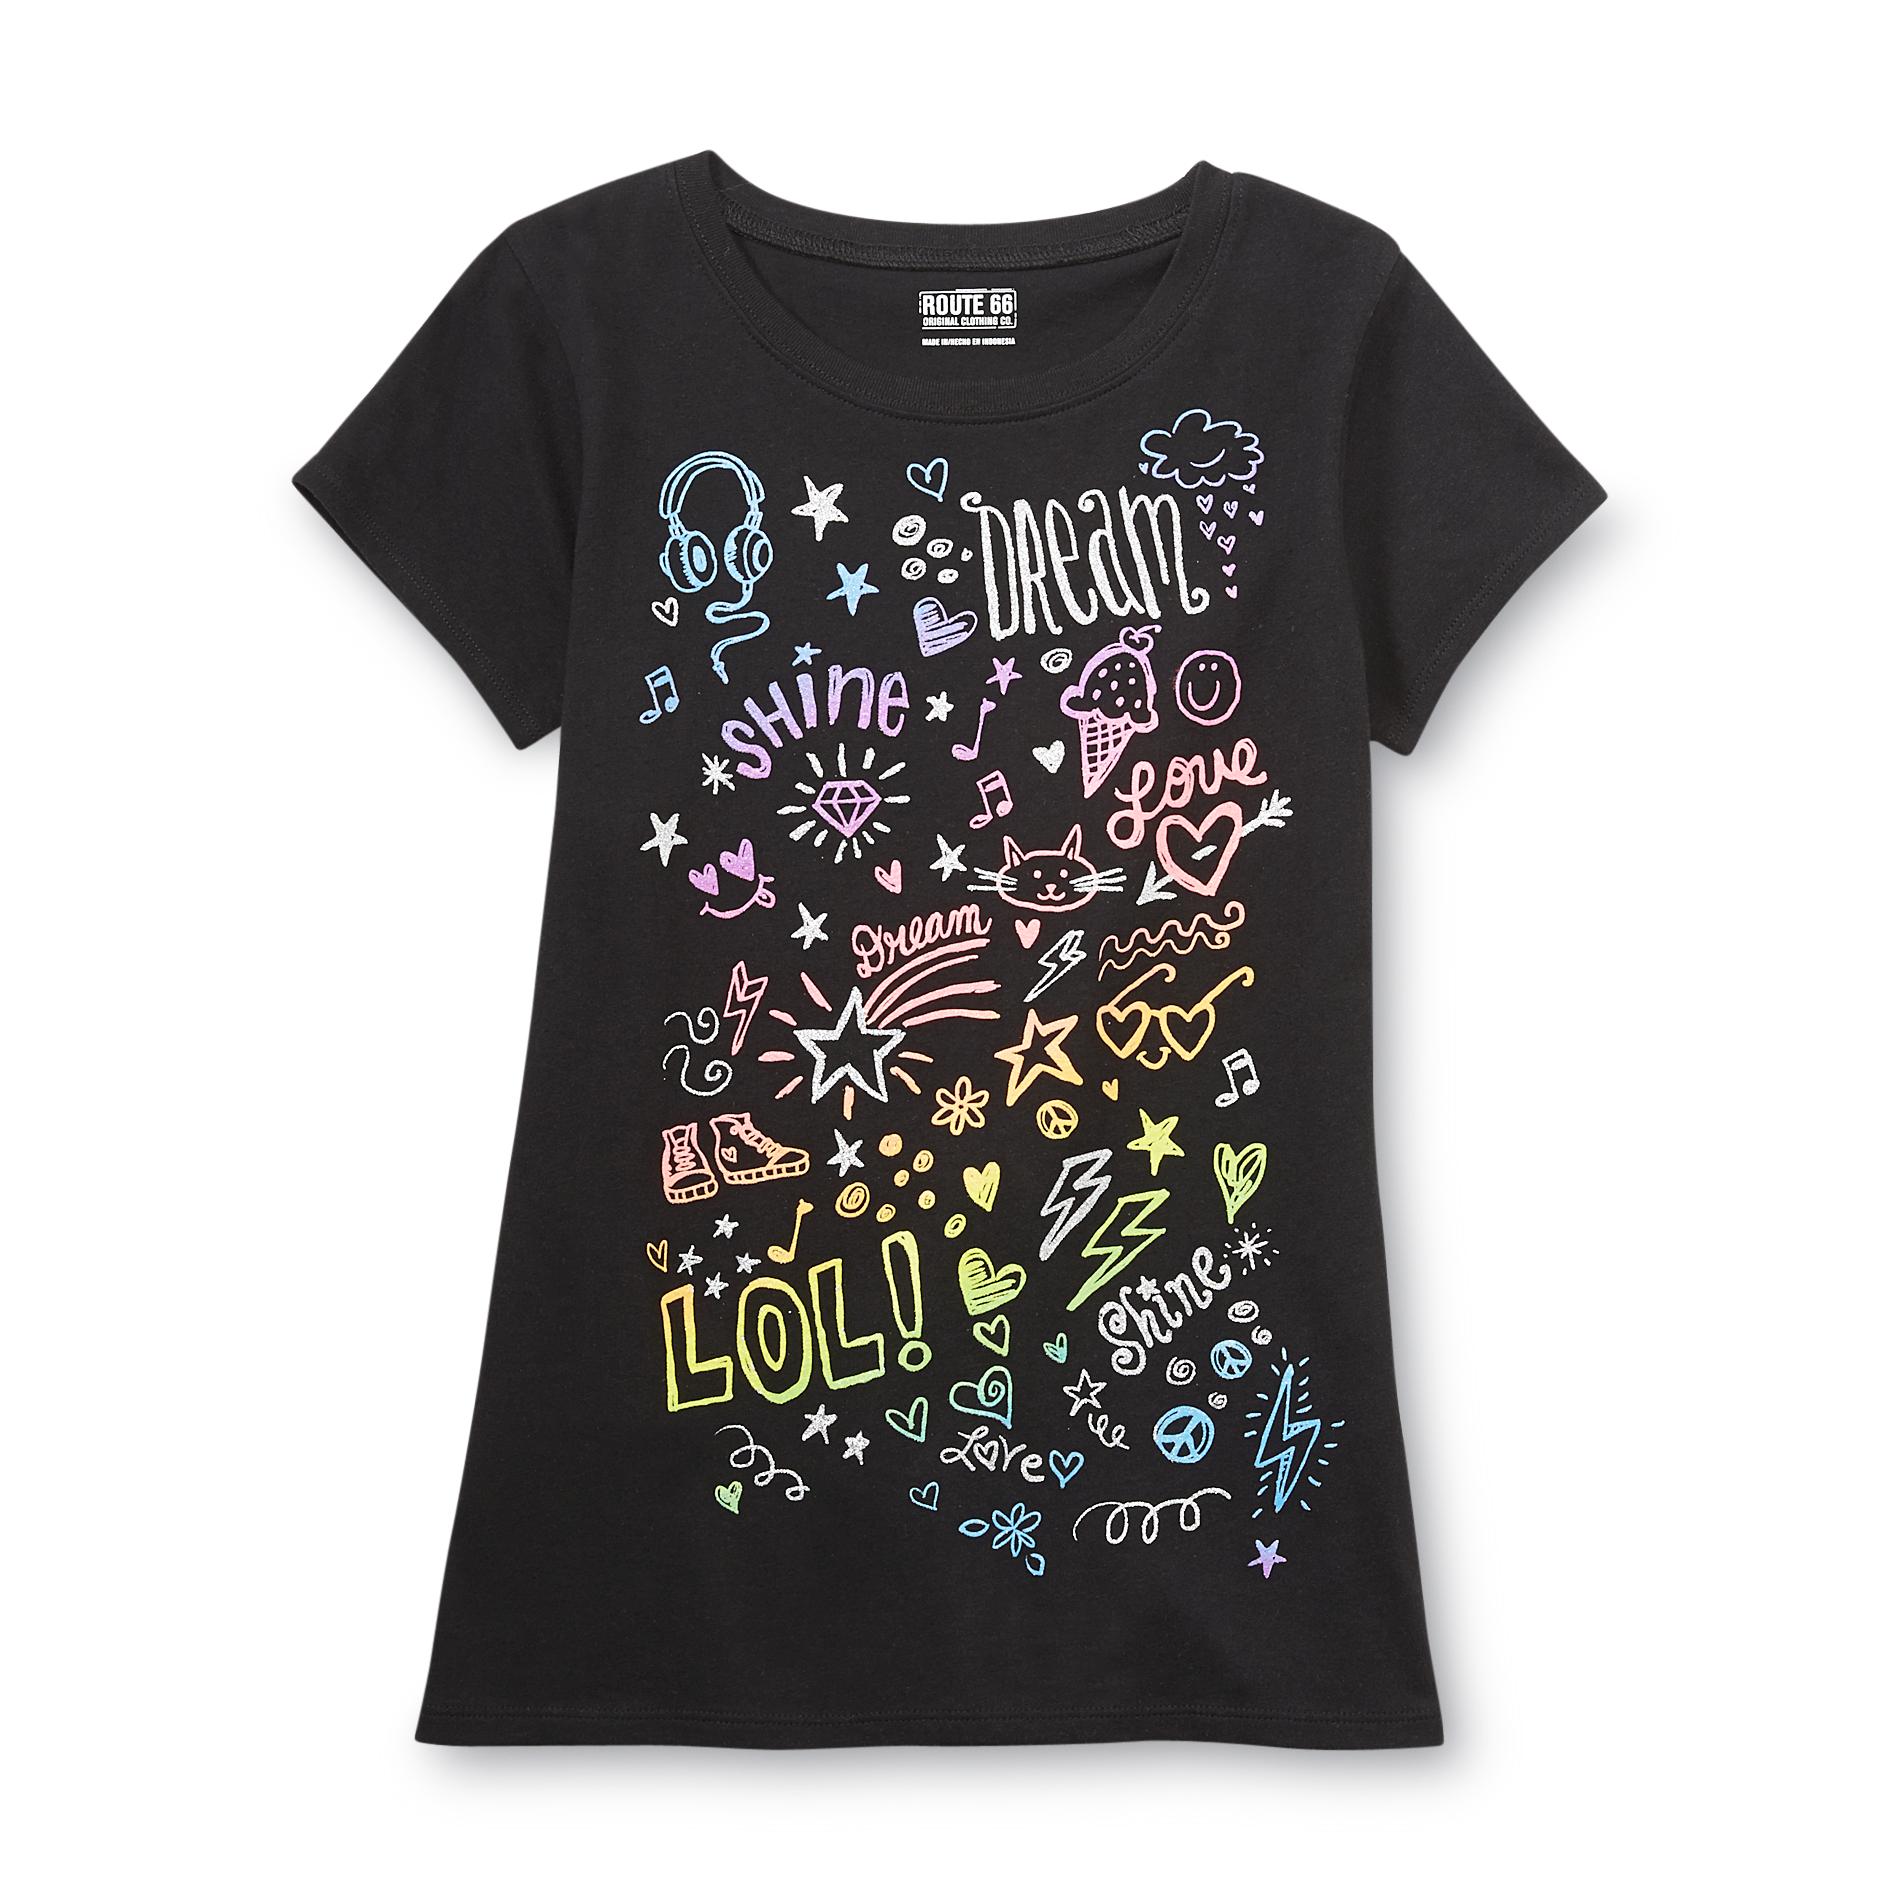 Route 66 Girl's Graphic T-Shirt - Dream  Love  LOL